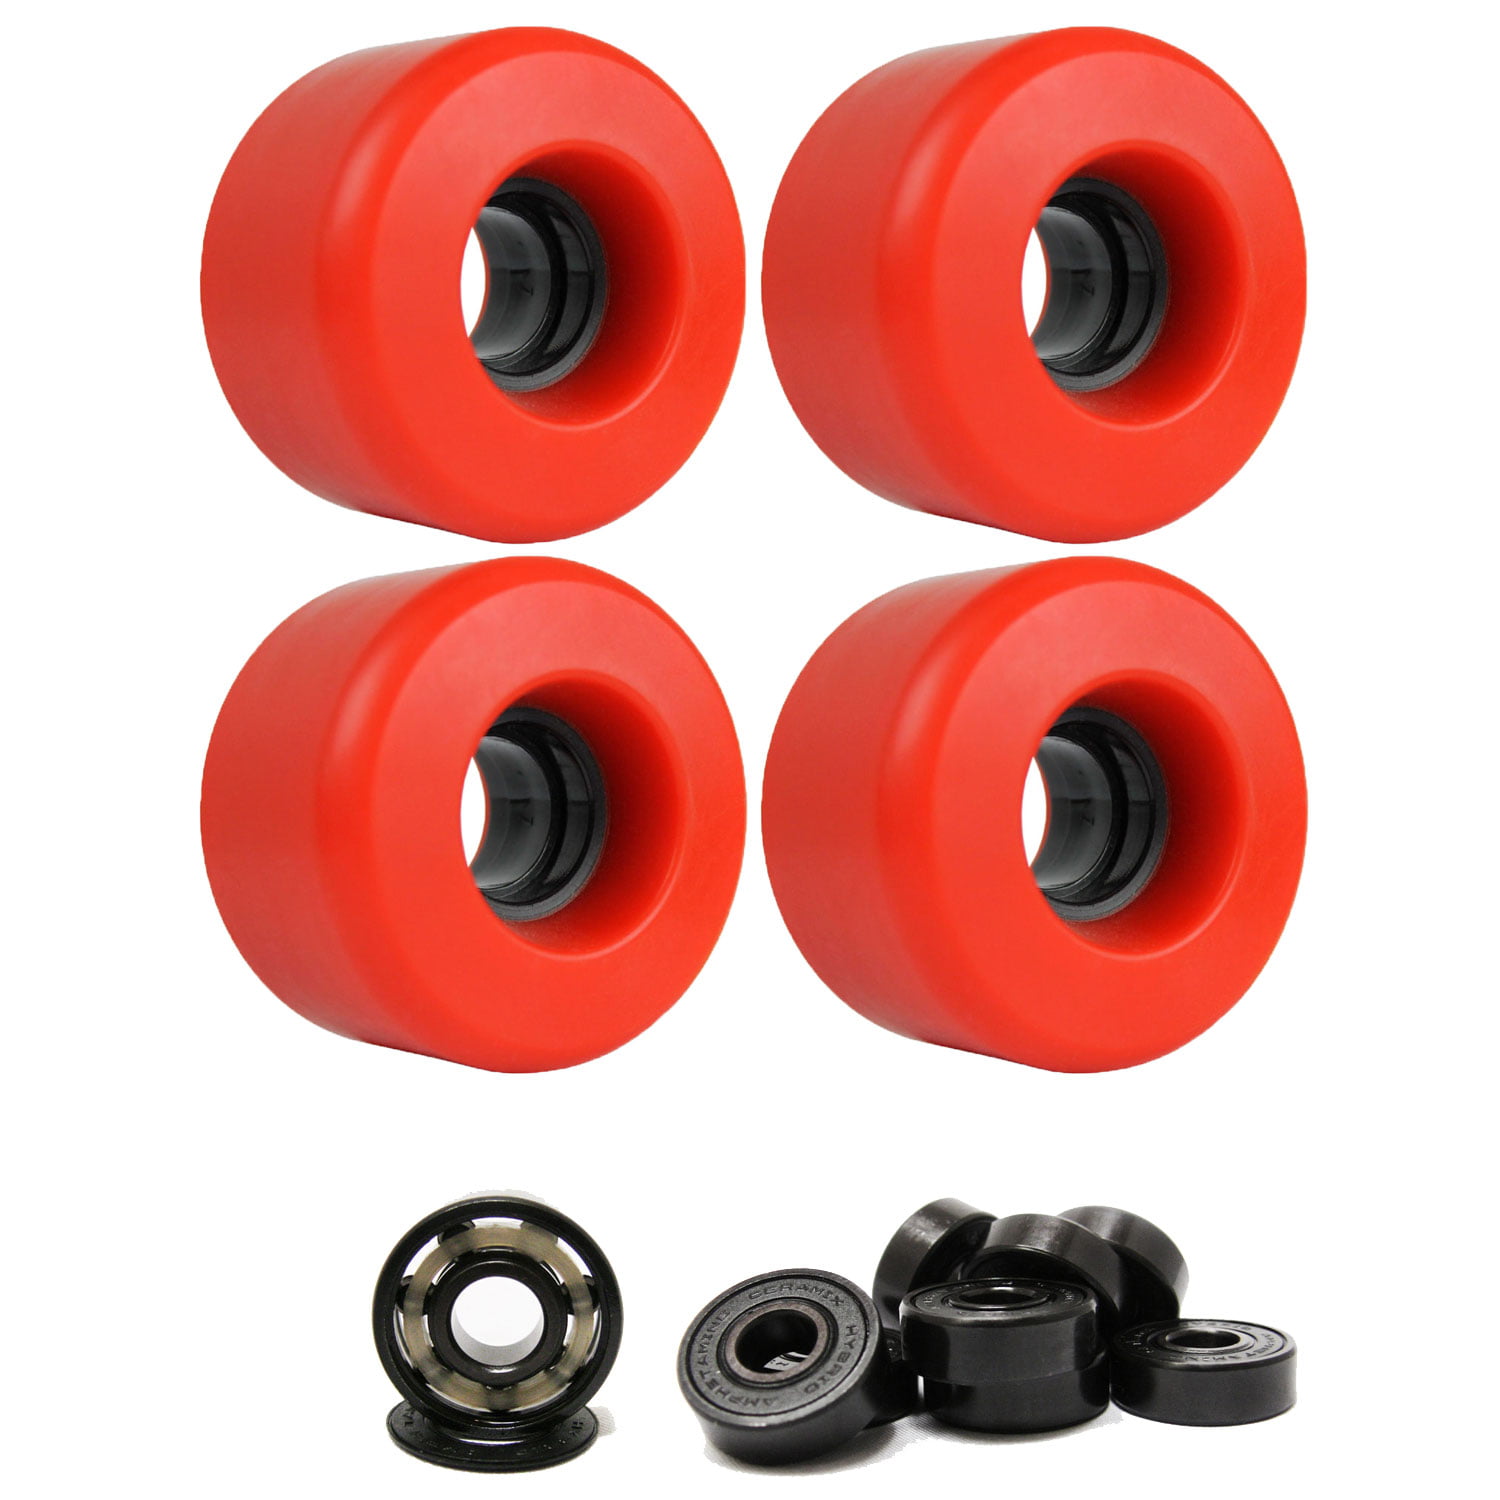 Details about   Longboard Cruiser Wheels Set 60mm x 32mm 82a Red USA Made Abec 7 